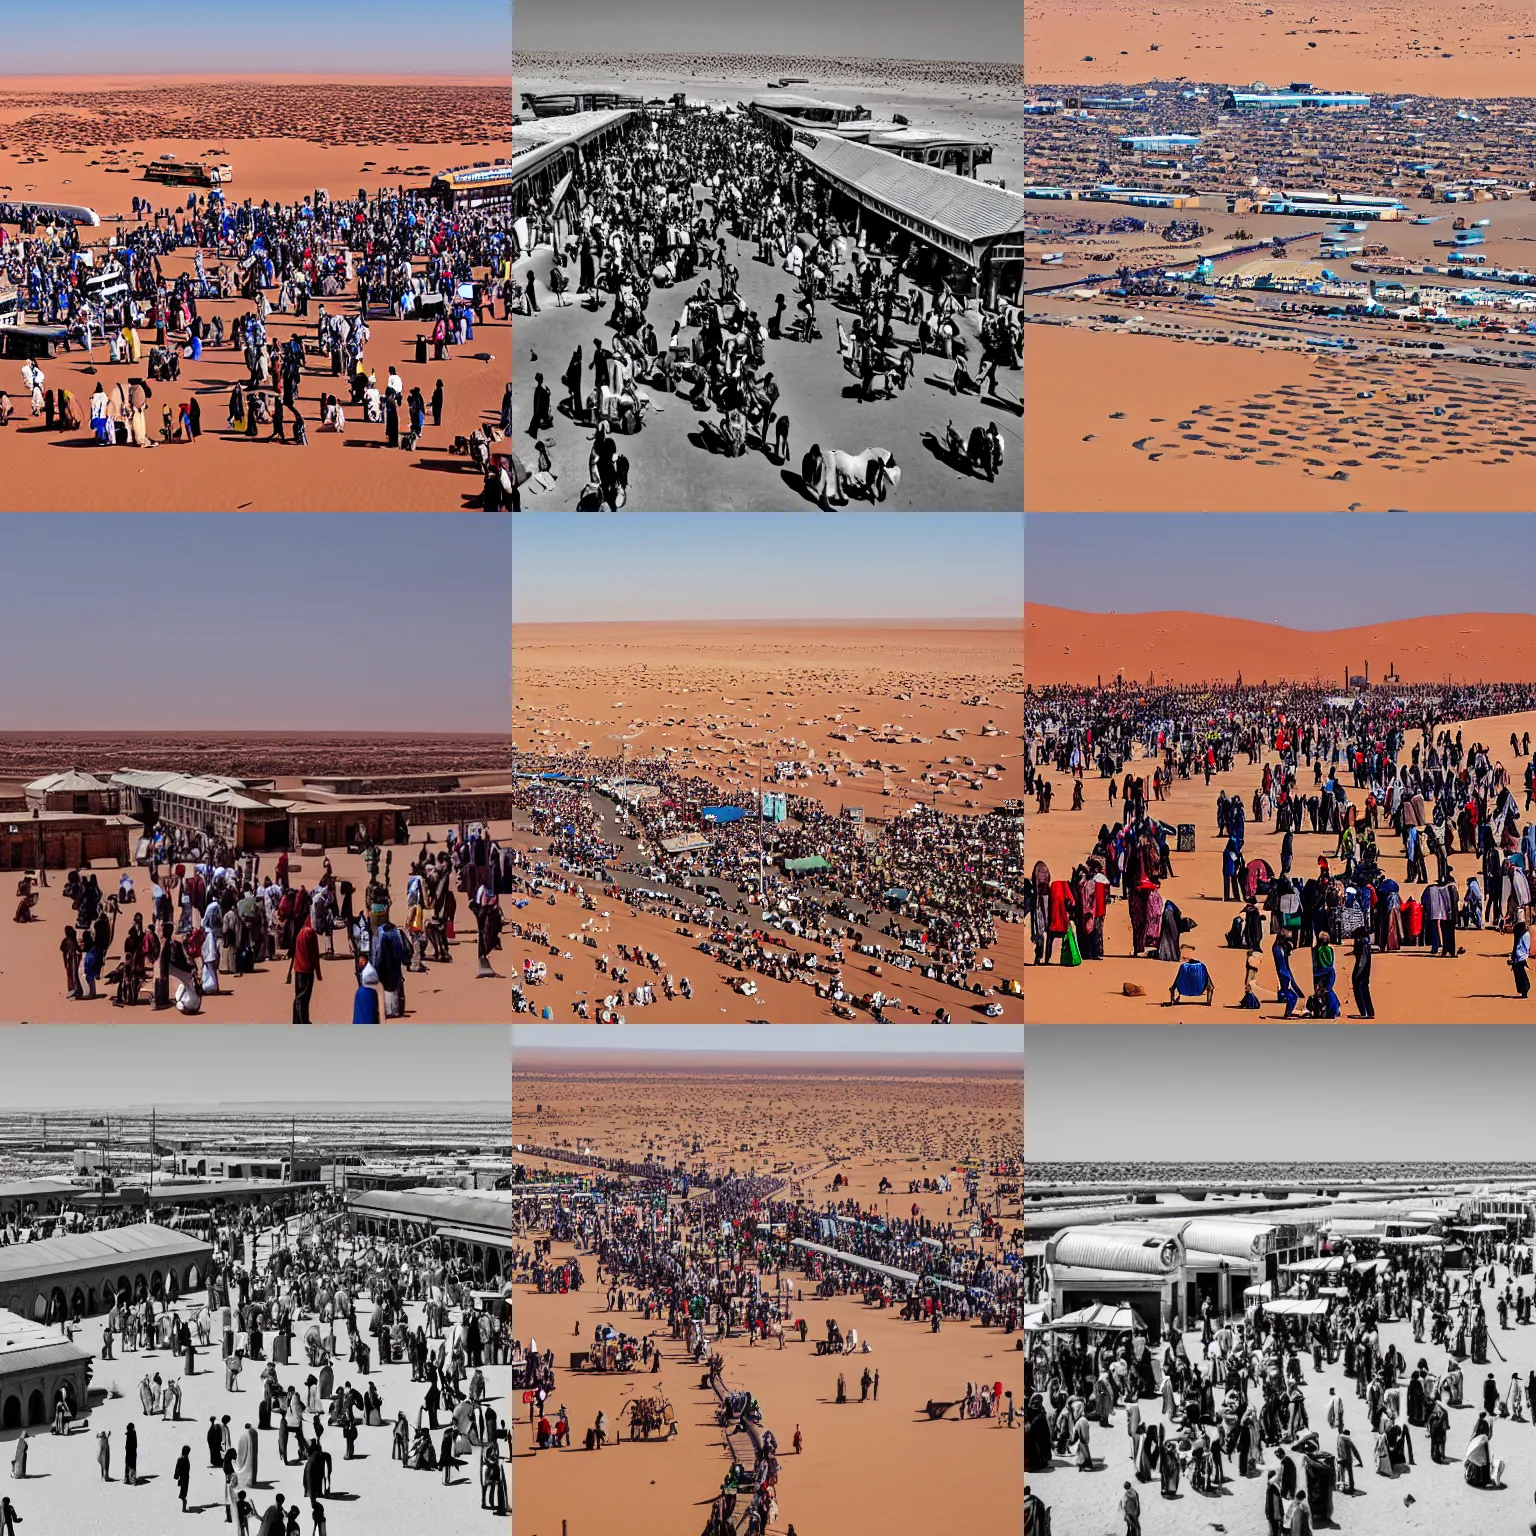 Prompt: Busy grand train station in the sahara desert